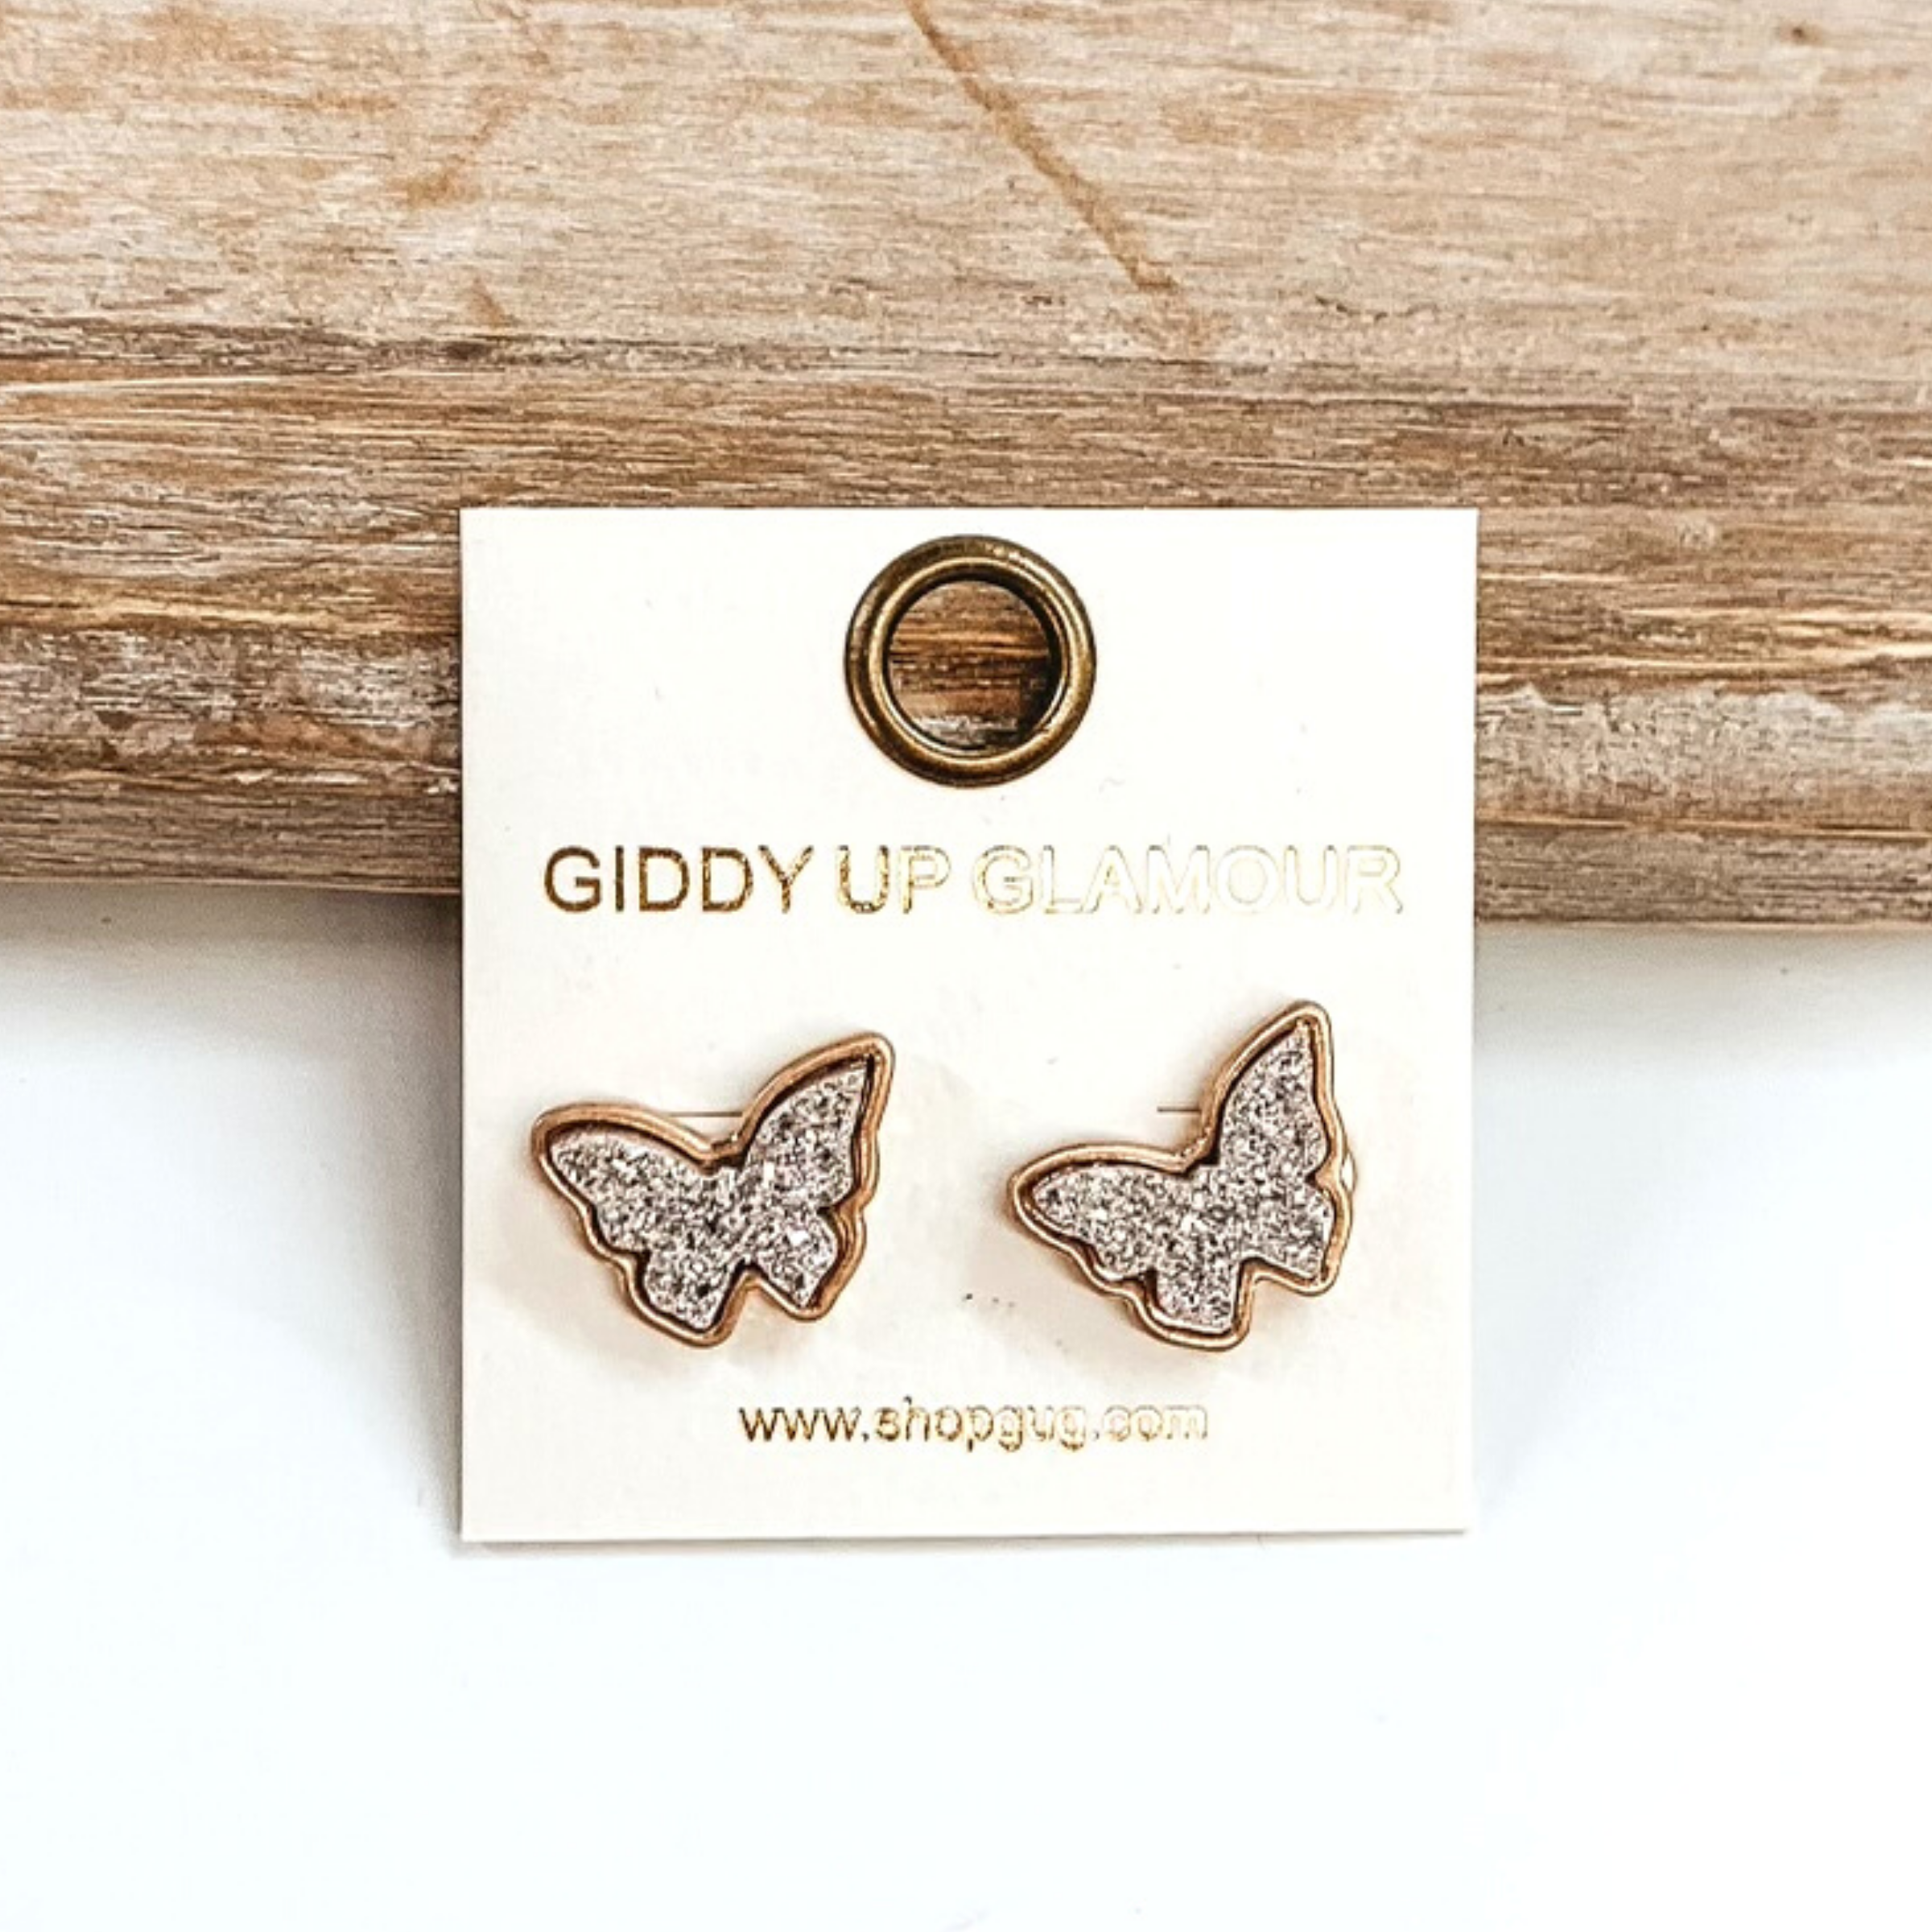 Gold post back earrings with druzy, rose gold, butterfly shaped stone. These earrings are pictured on a white earrings holder on a white background, leaning against a tan block.